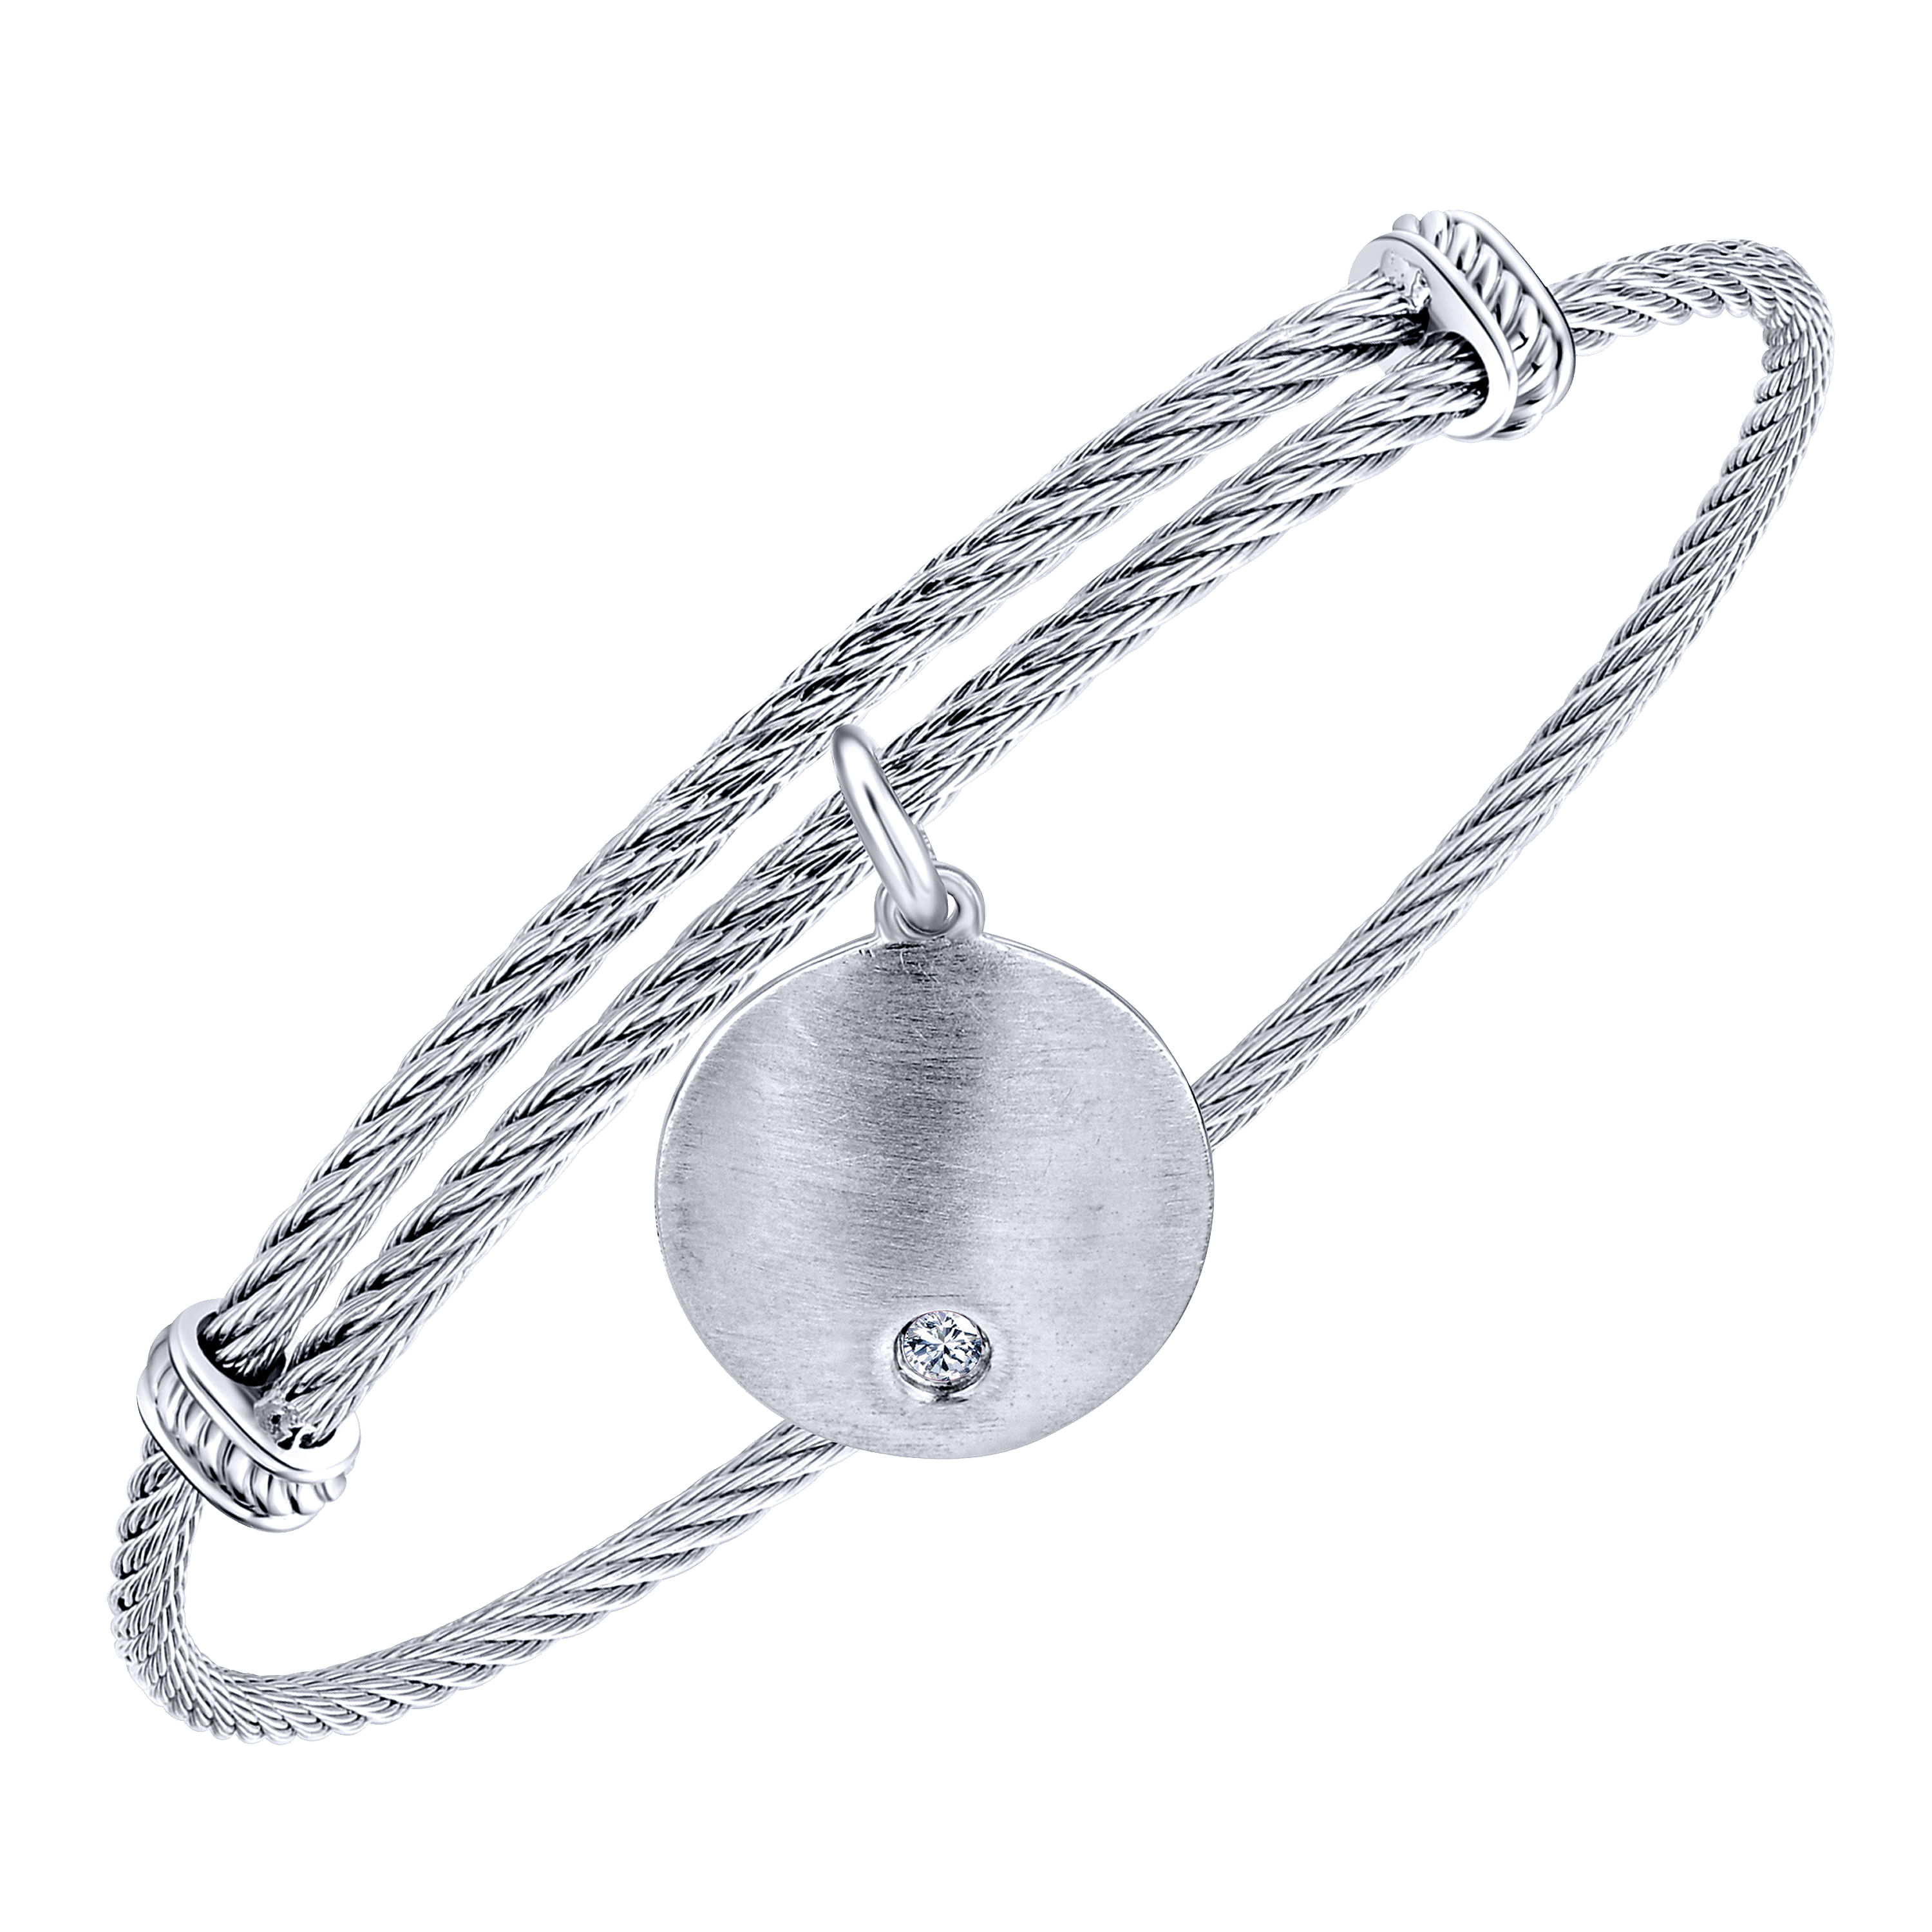 Adjustable Stainless Steel Bangle with Round Sterling Silver White Sapphire Stone Disc Charm